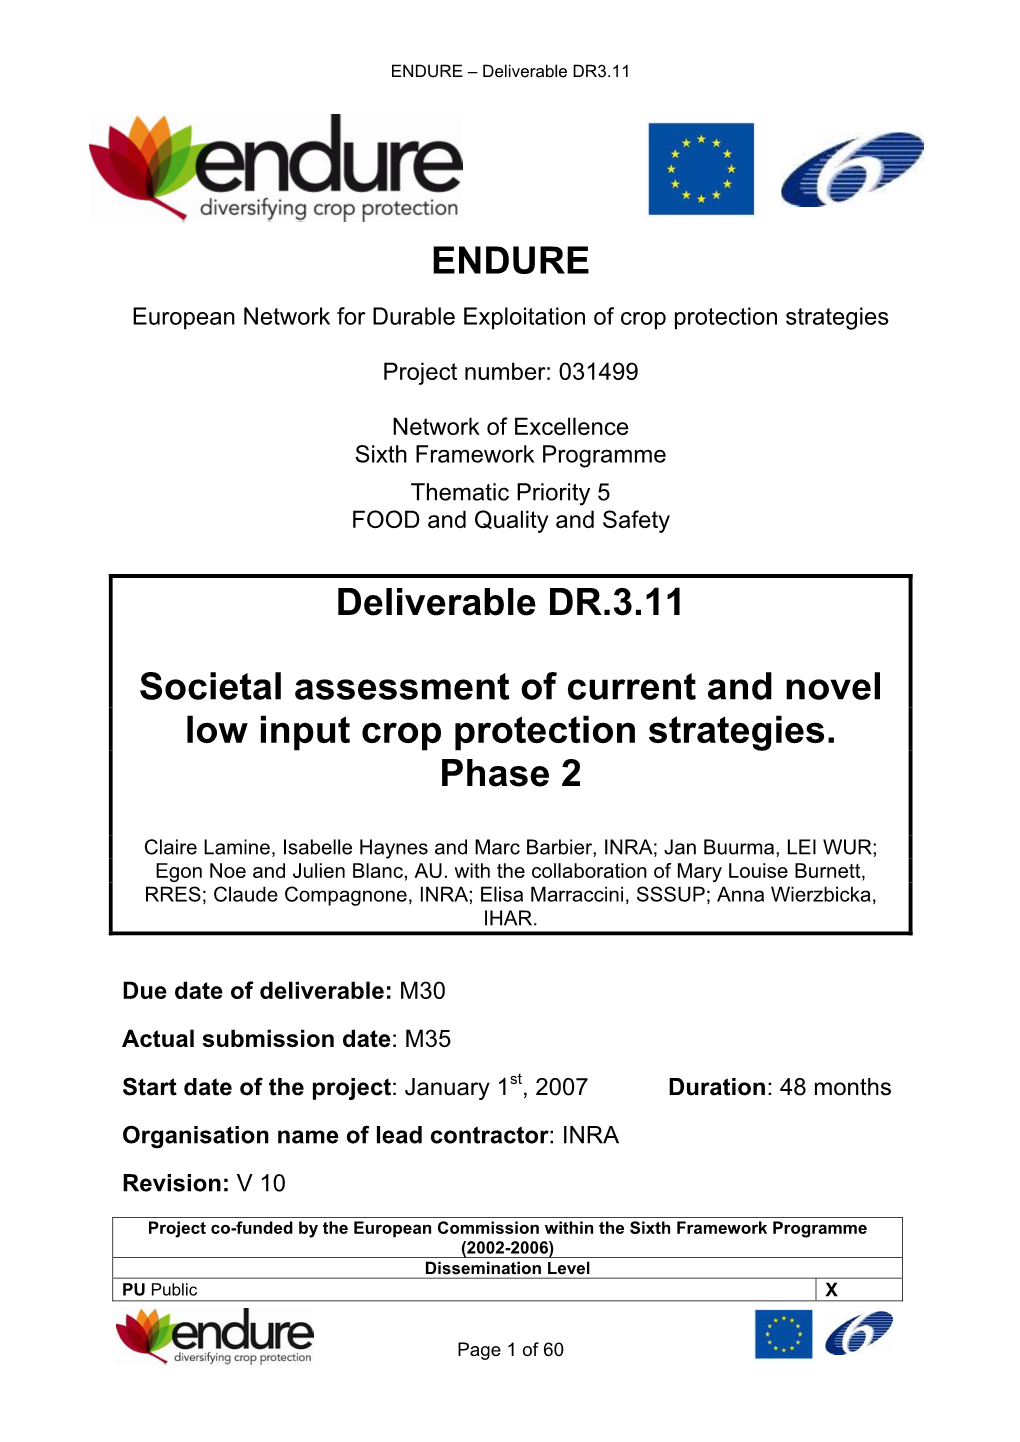 ENDURE Deliverable DR.3.11 Societal Assessment of Current and Novel Low Input Crop Protection Strategies. Phase 2